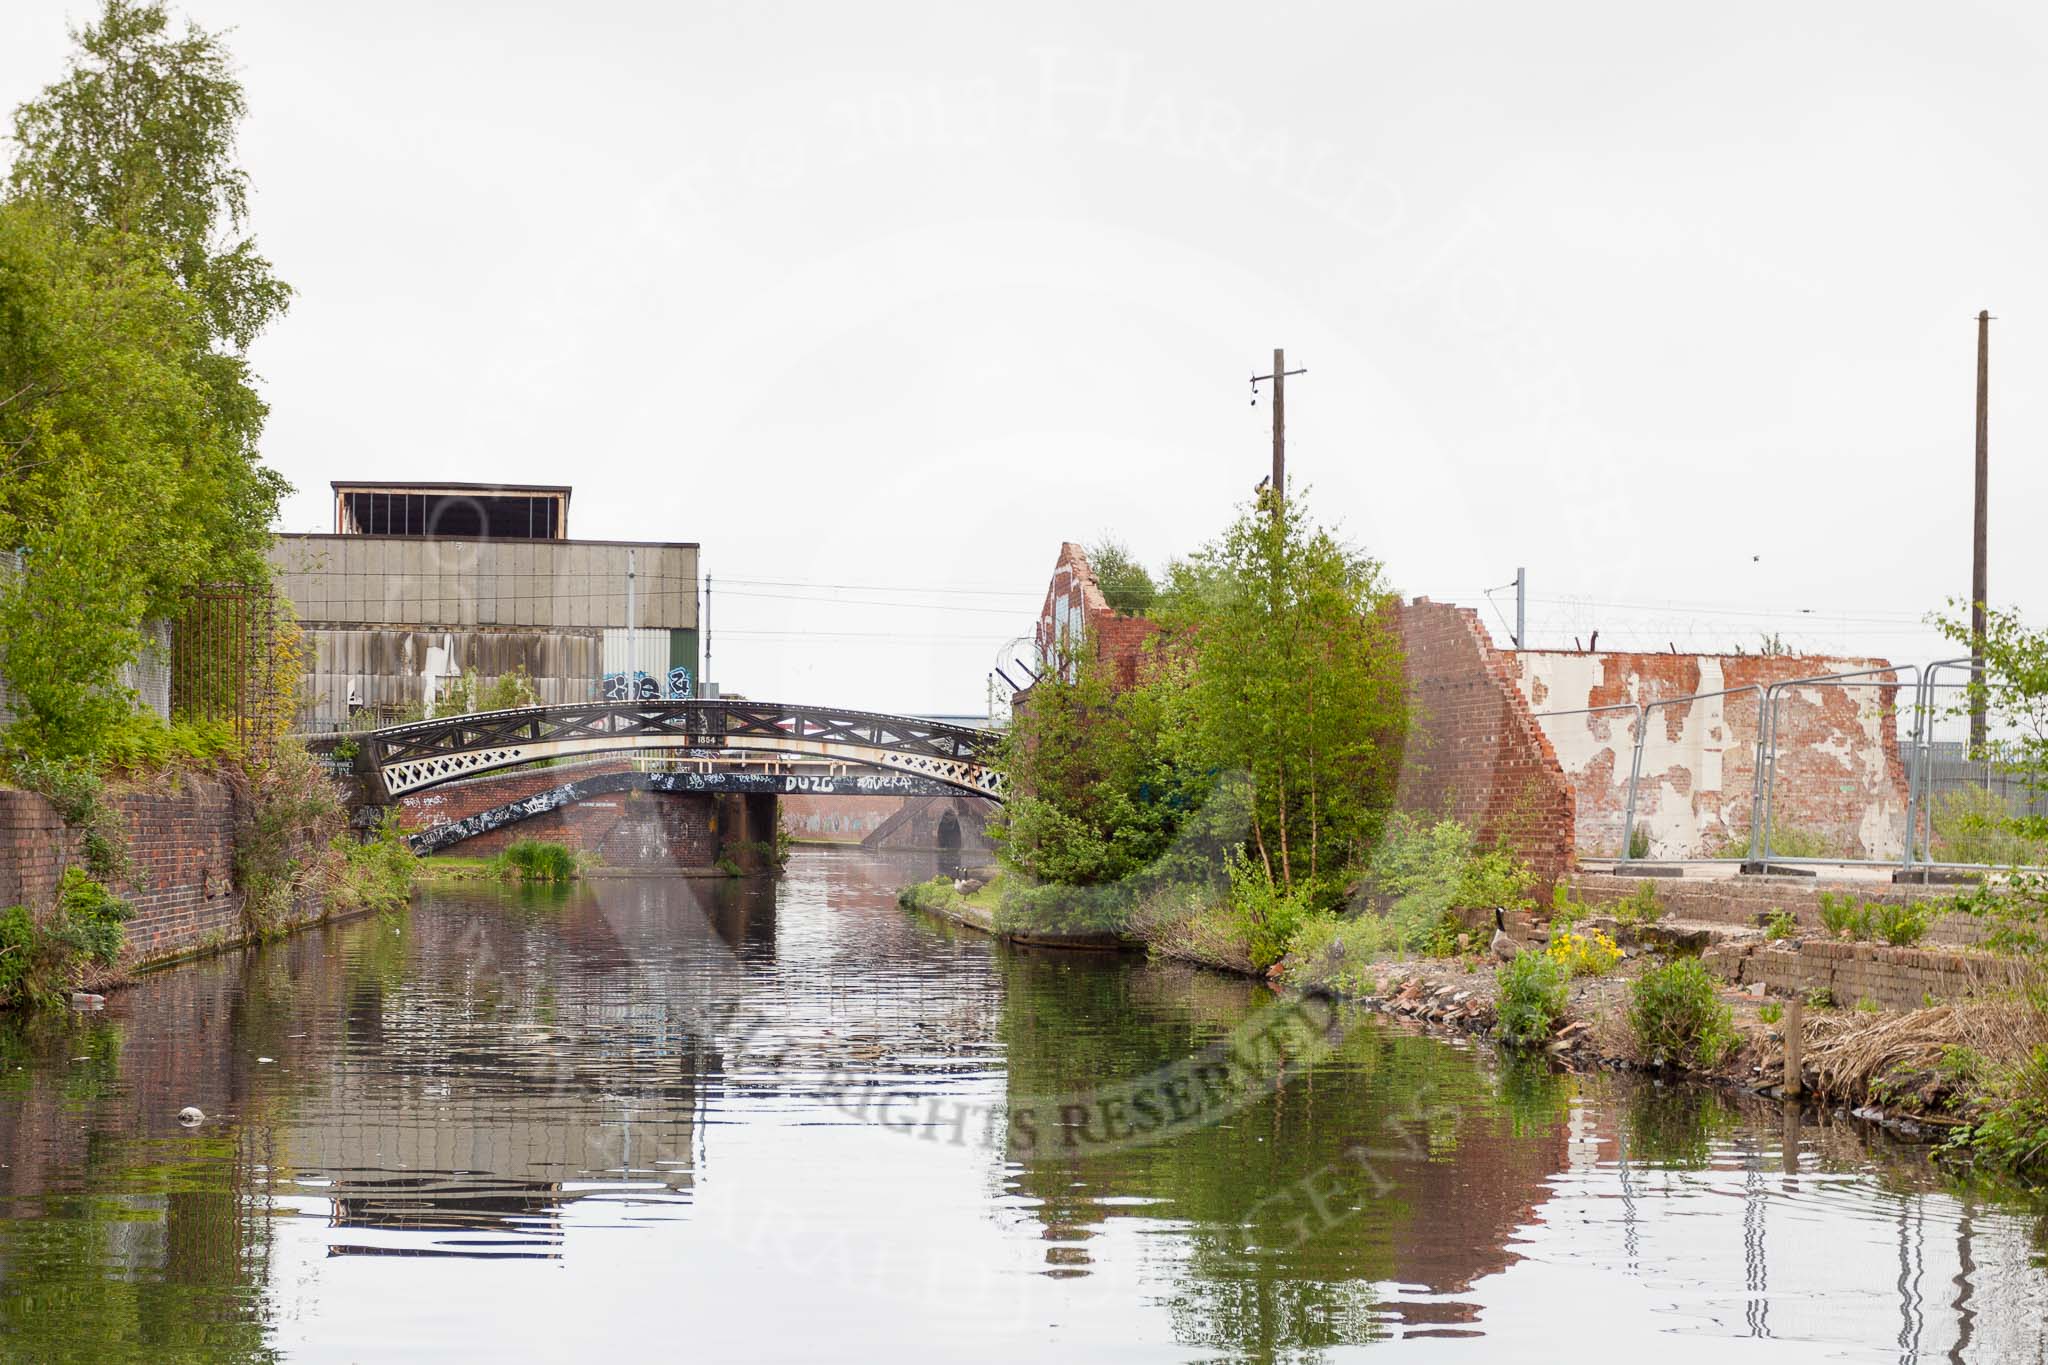 BCN 24h Marathon Challenge 2015: Approaching Rotton Park Junction from the Icknield Port Loop. The Soho Loop, part of the old BCN, is ahead of the crossing New Main Line.
Birmingham Canal Navigations,



on 23 May 2015 at 08:56, image #22